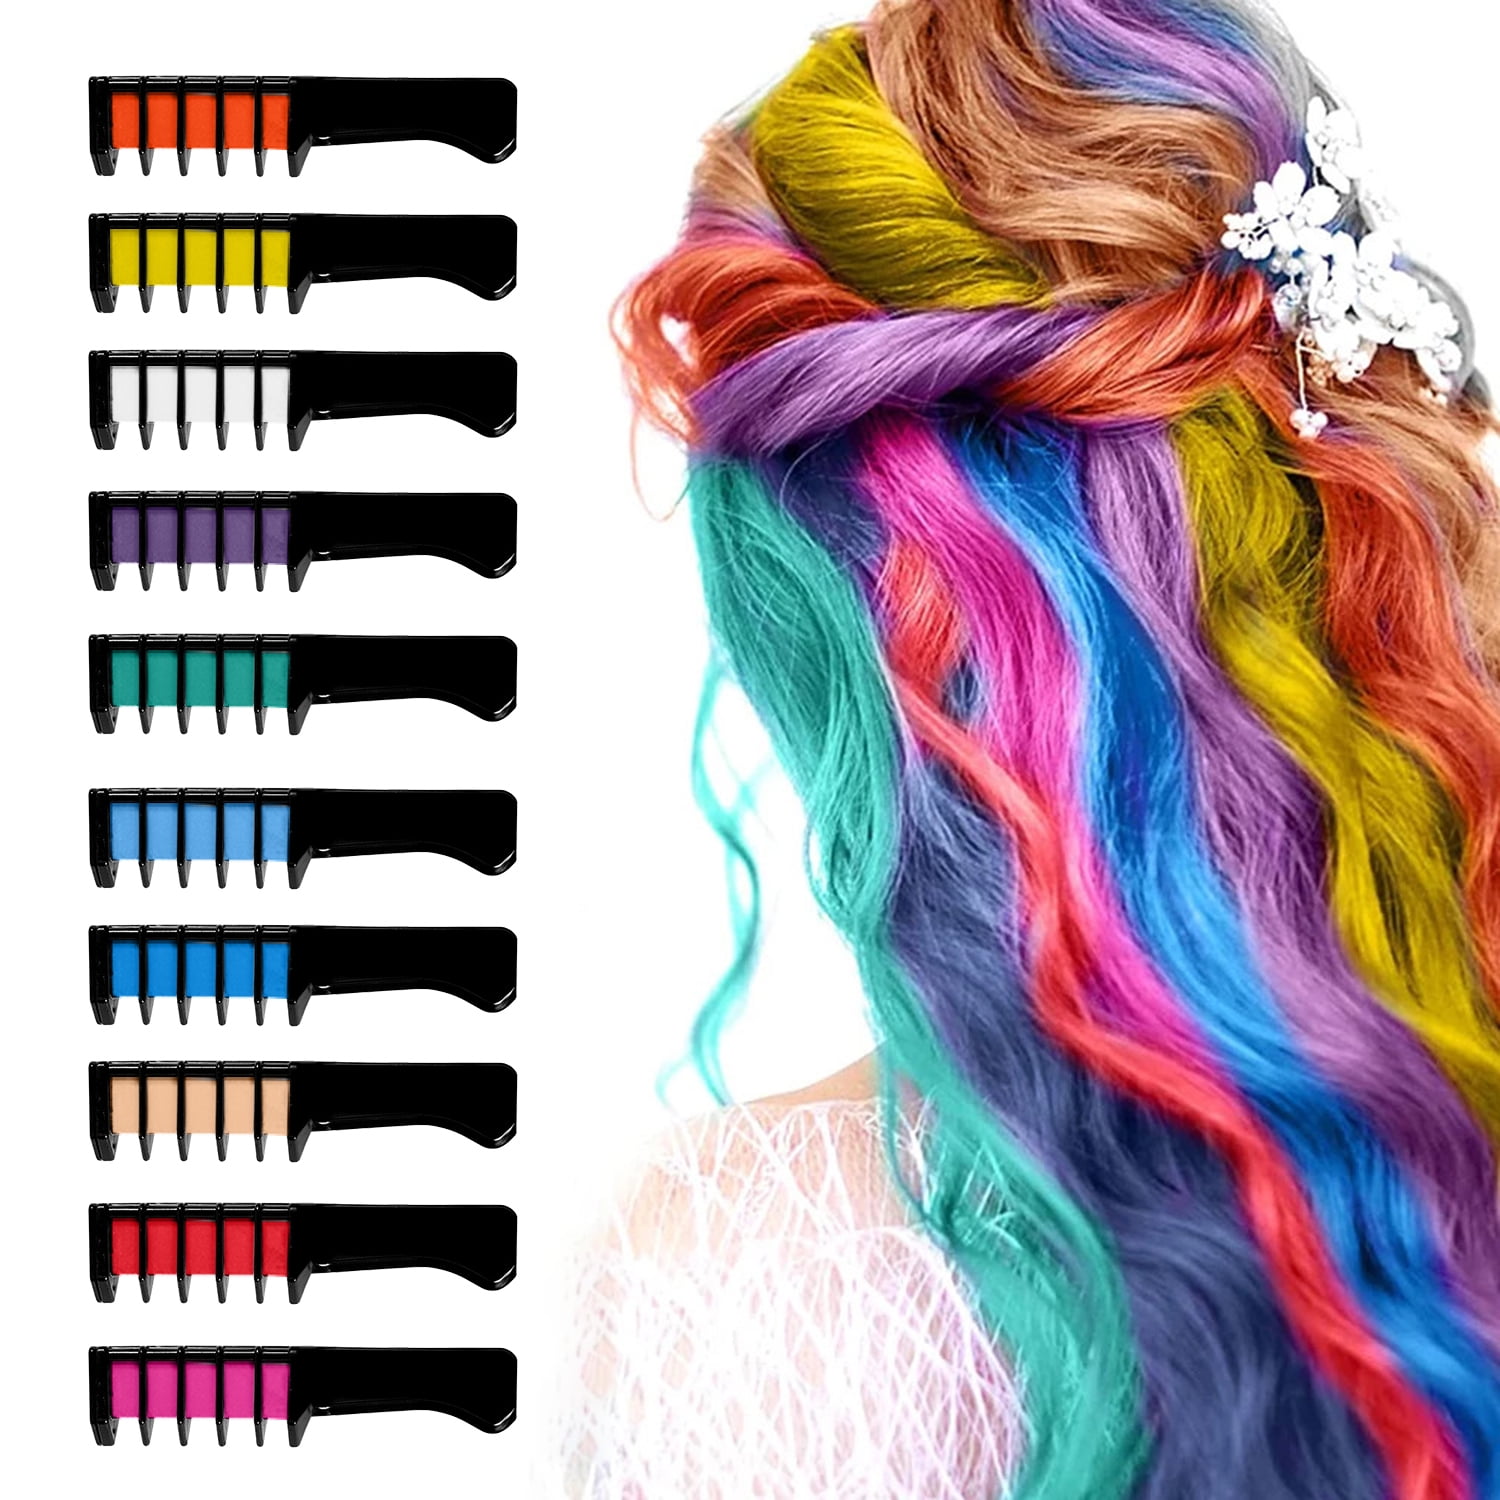 Inadays Hair Chalk Comb Temporary Bright Hair Color Dye for Girls Kids, Washable Hair Chalk for Kids-girls Toys Birthday Halloween Christmas Gifts for